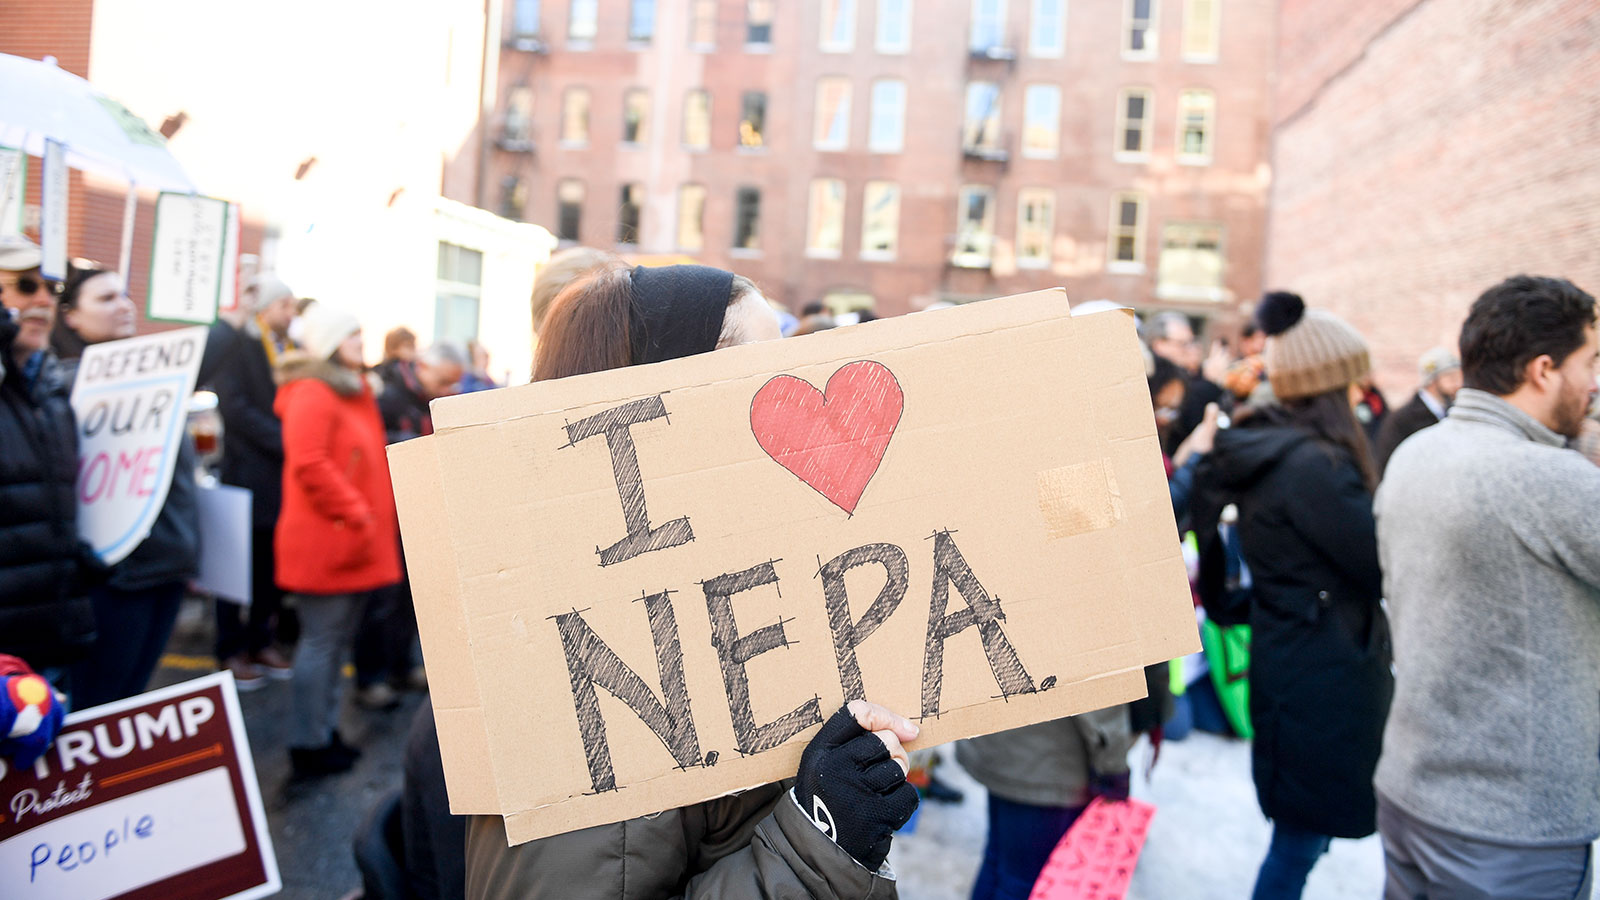 A protester holds up a sign that says "I heart NEPA"